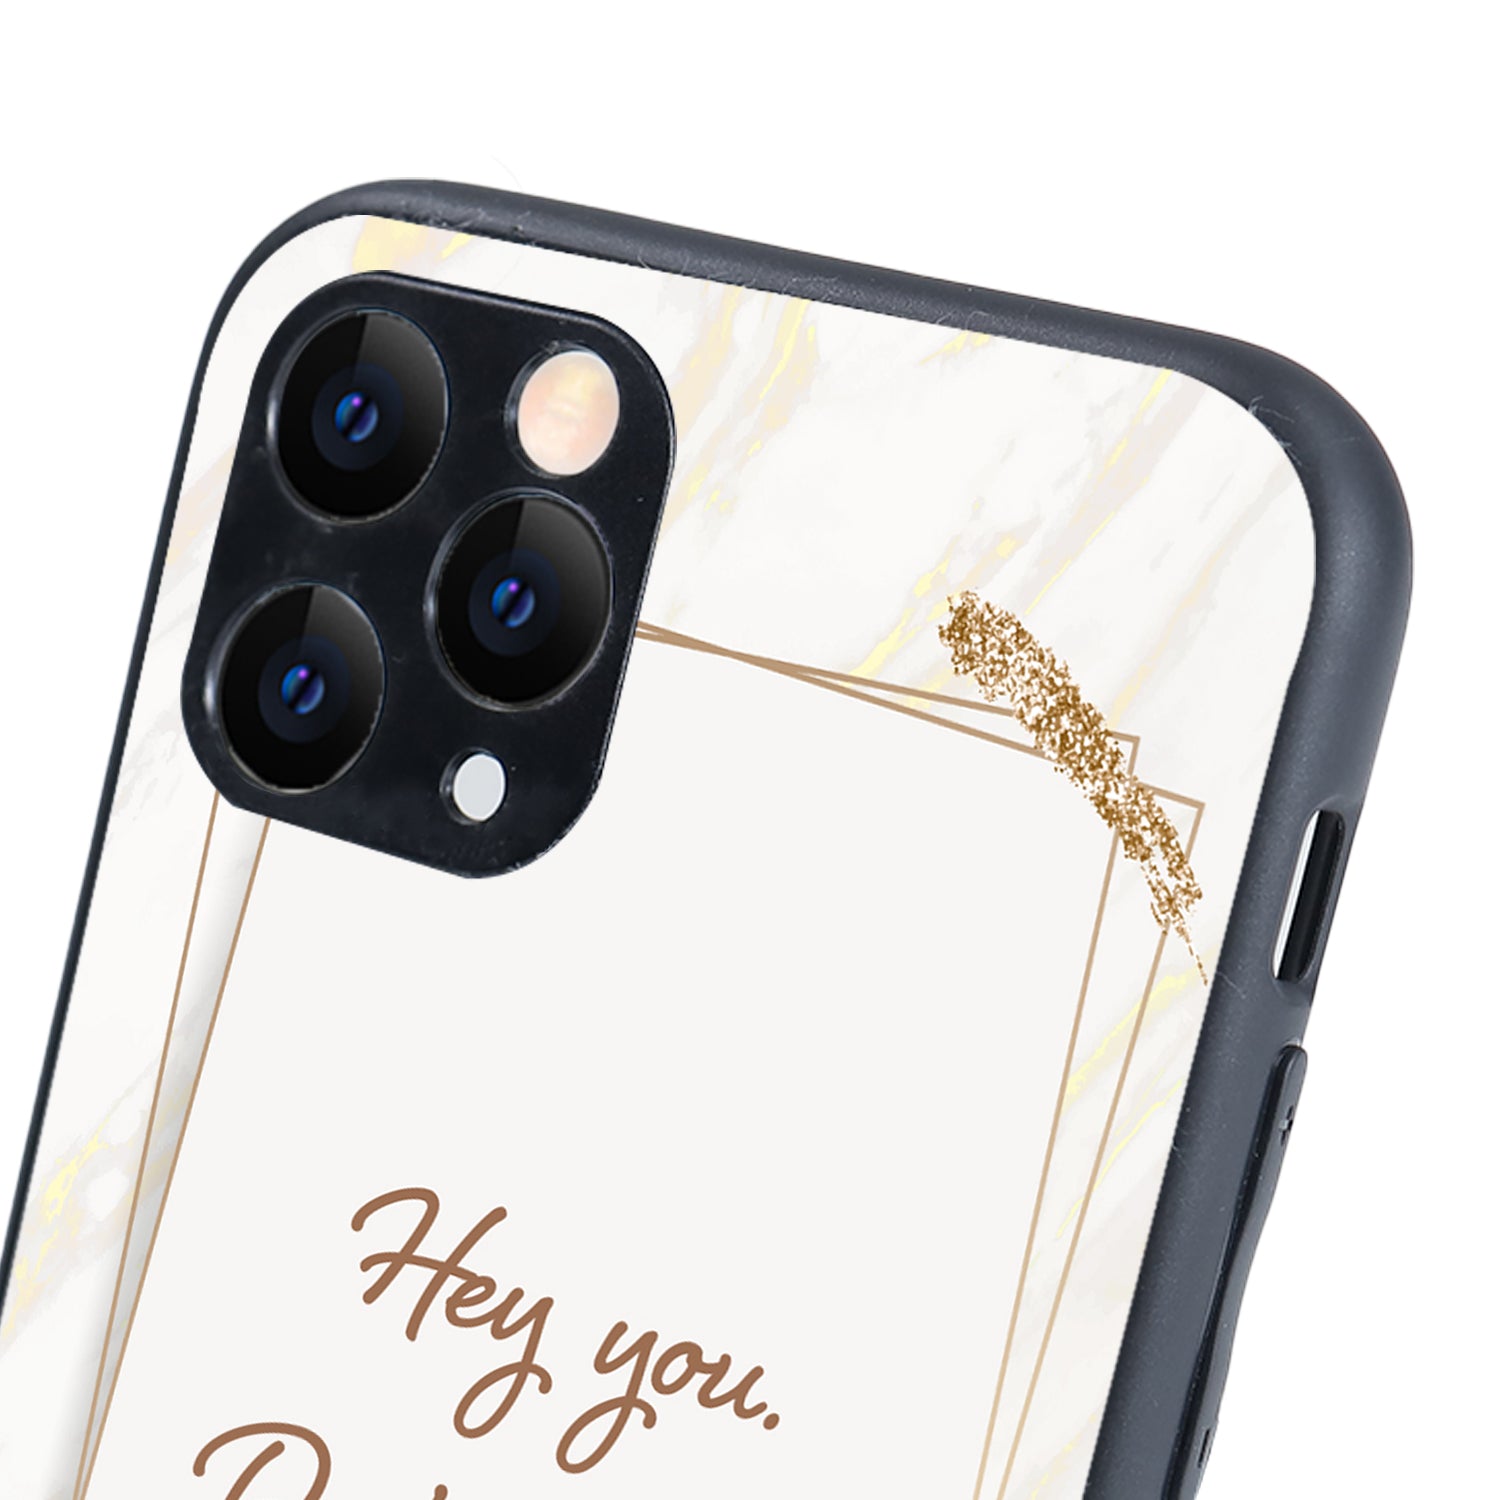 Hey You Motivational Quotes iPhone 11 Pro Case